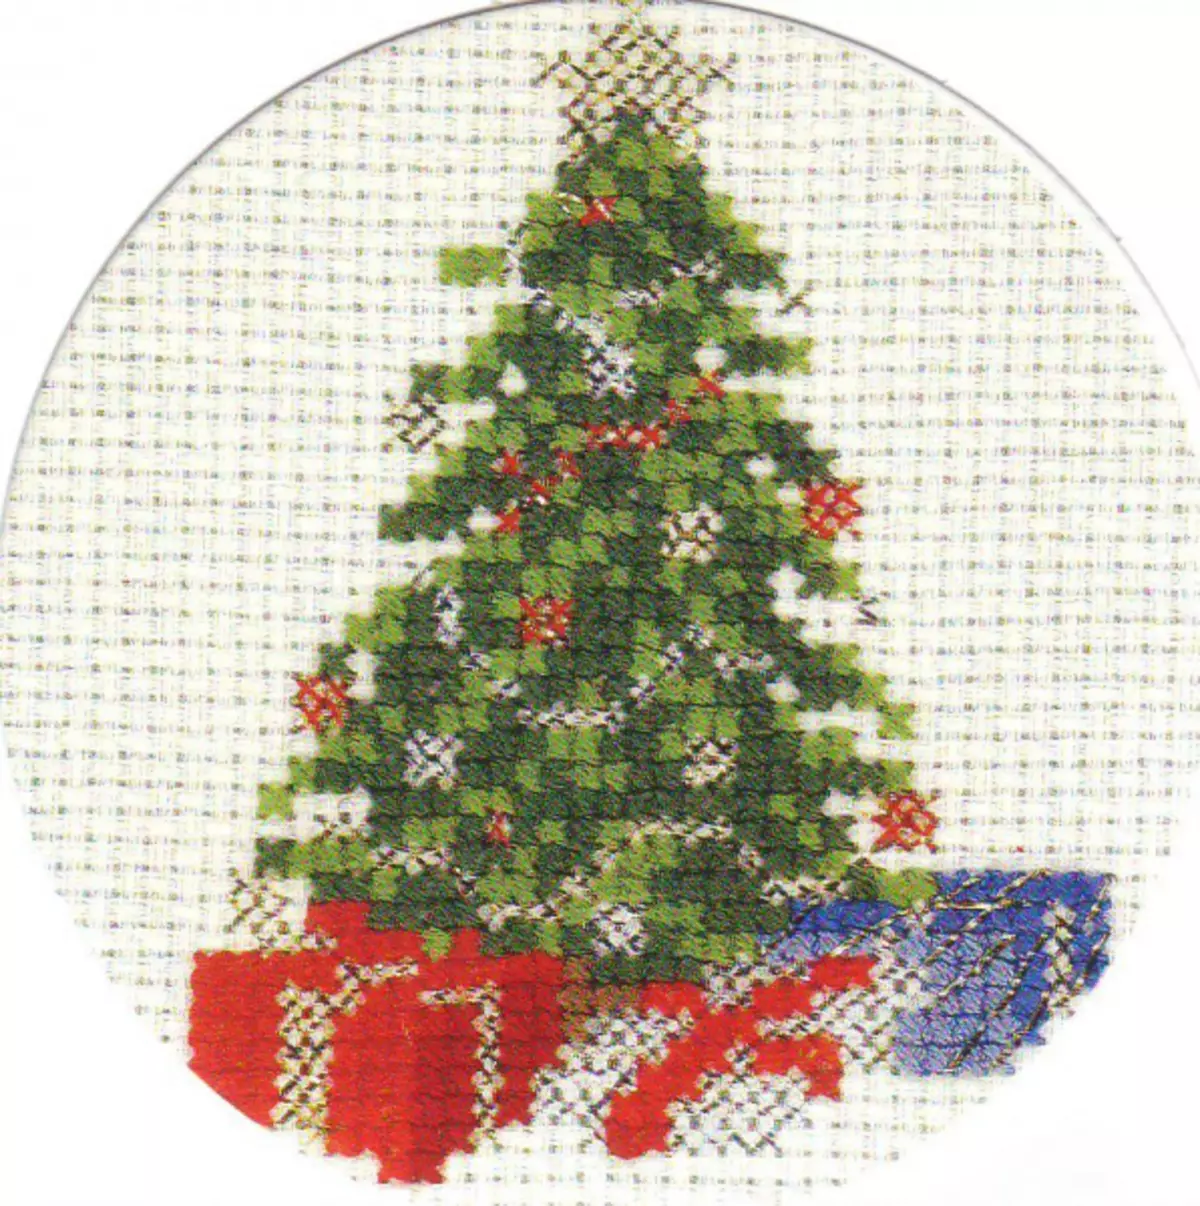 Embroidery Christmas toys with a cross - embroidery scheme for the new year